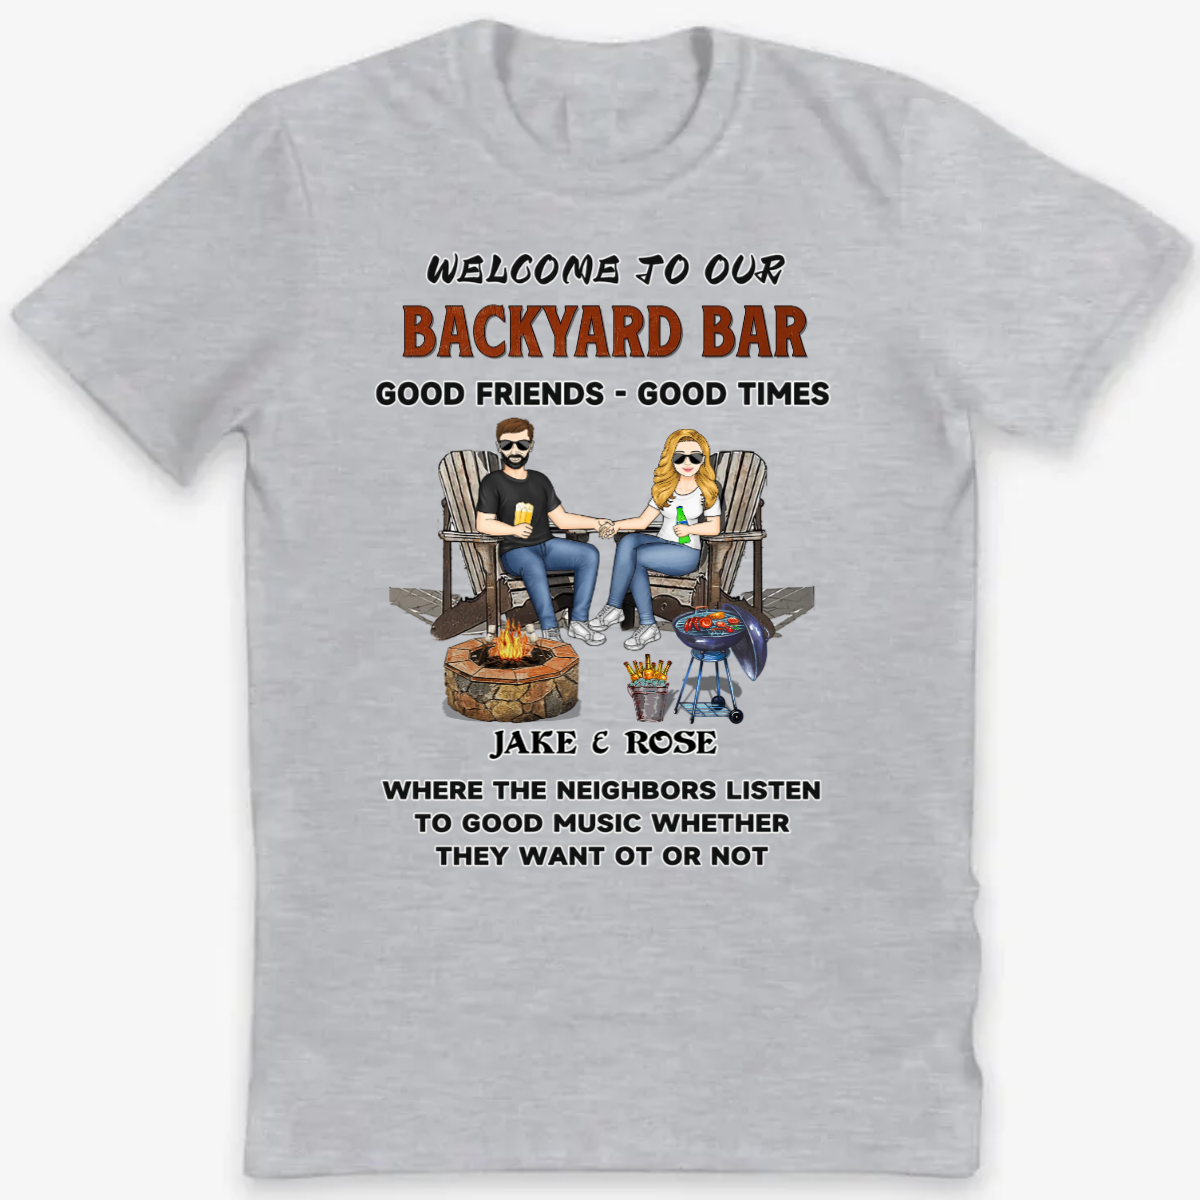 Patio Grilling Family Couple Listen To The Good Music - Personalized Classic Tee